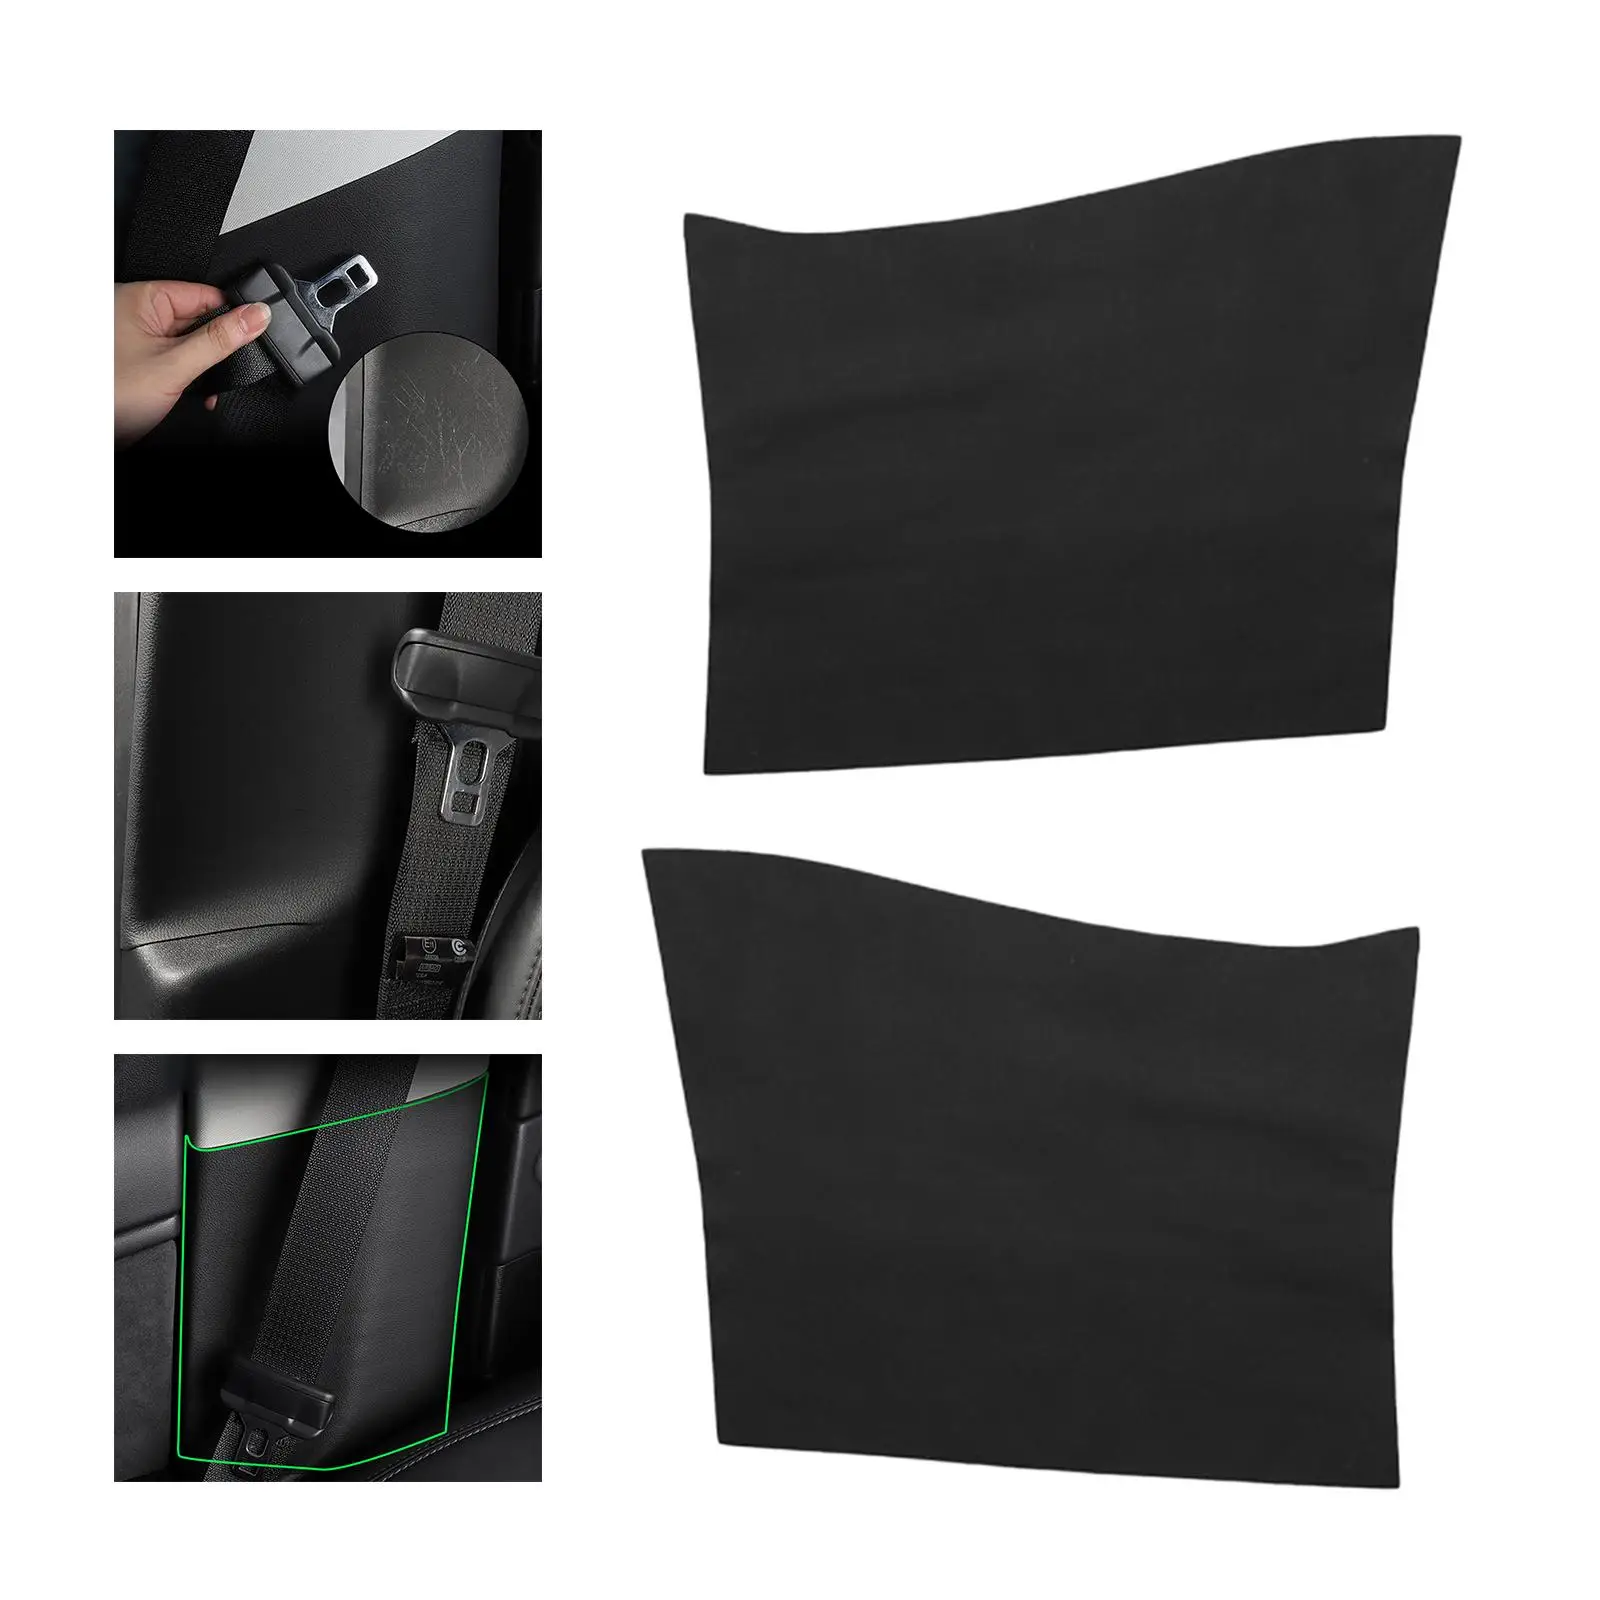 B-Pillar Protector Stickers Invisible Both Sides Adhesive Anti-Kick Pad for Tesla Model 3 Car Left and Right Edge Cover